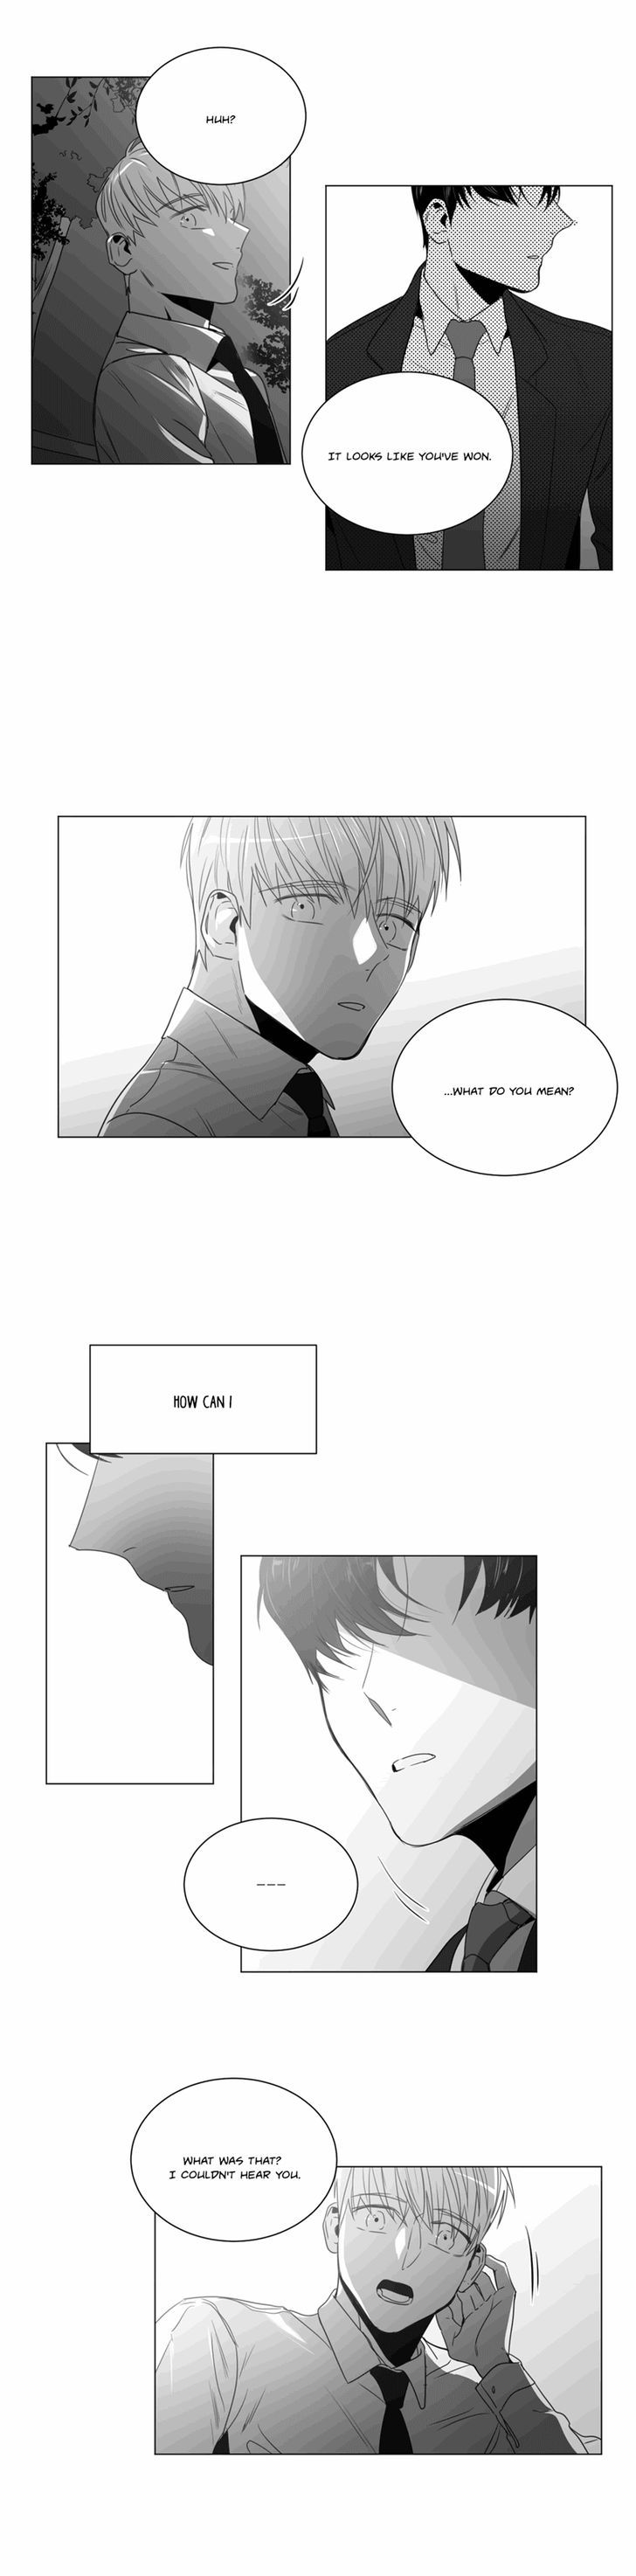 Lover Boy (Lezhin) Chapter 033 page 17